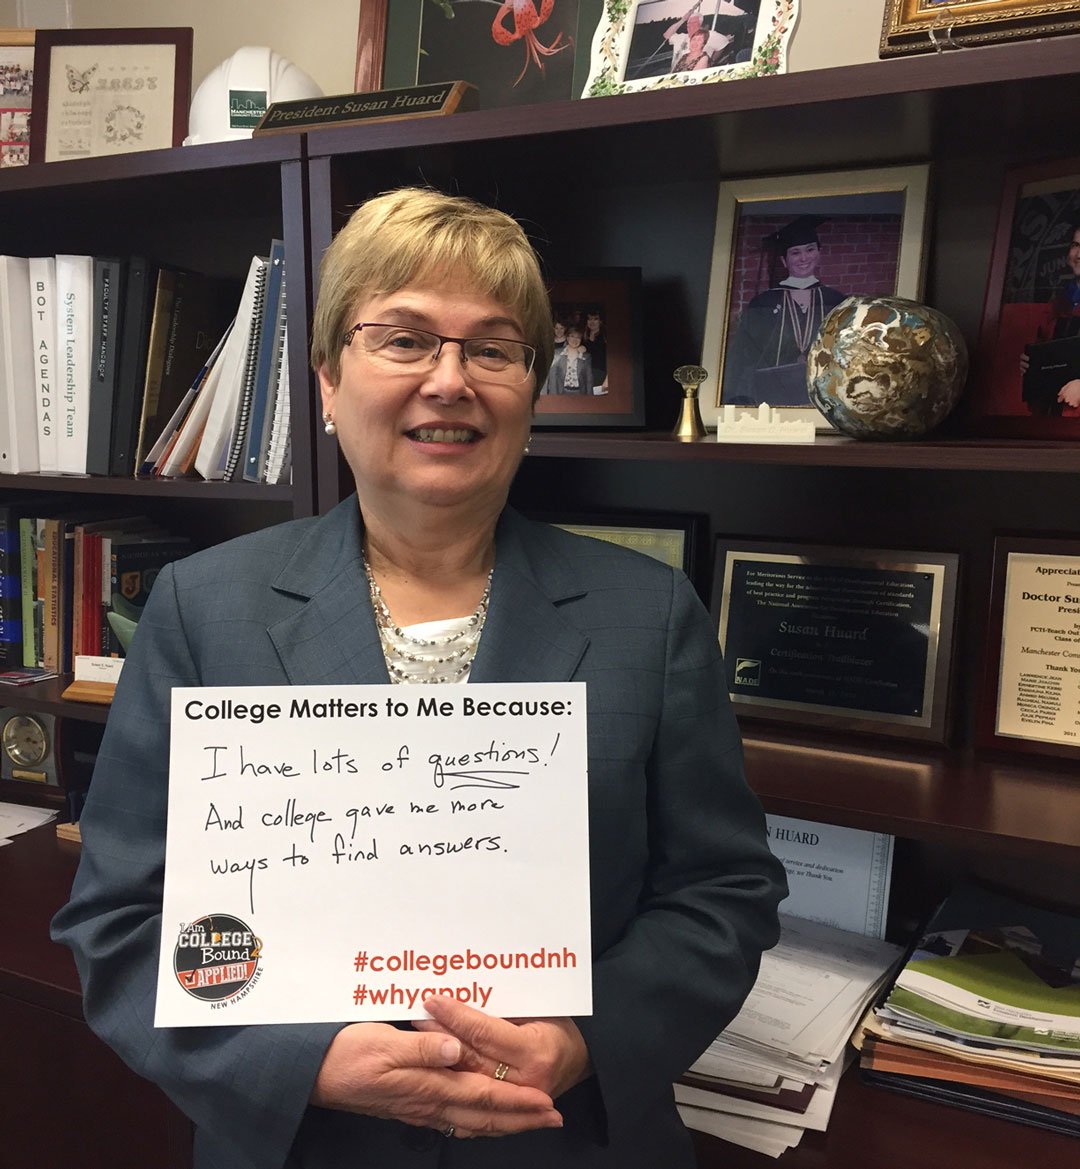 MCC President Susan Huard, “I have lots of questions! College gave me more ways to find answers.” #collegeboundnh bit.ly/2dxYEux